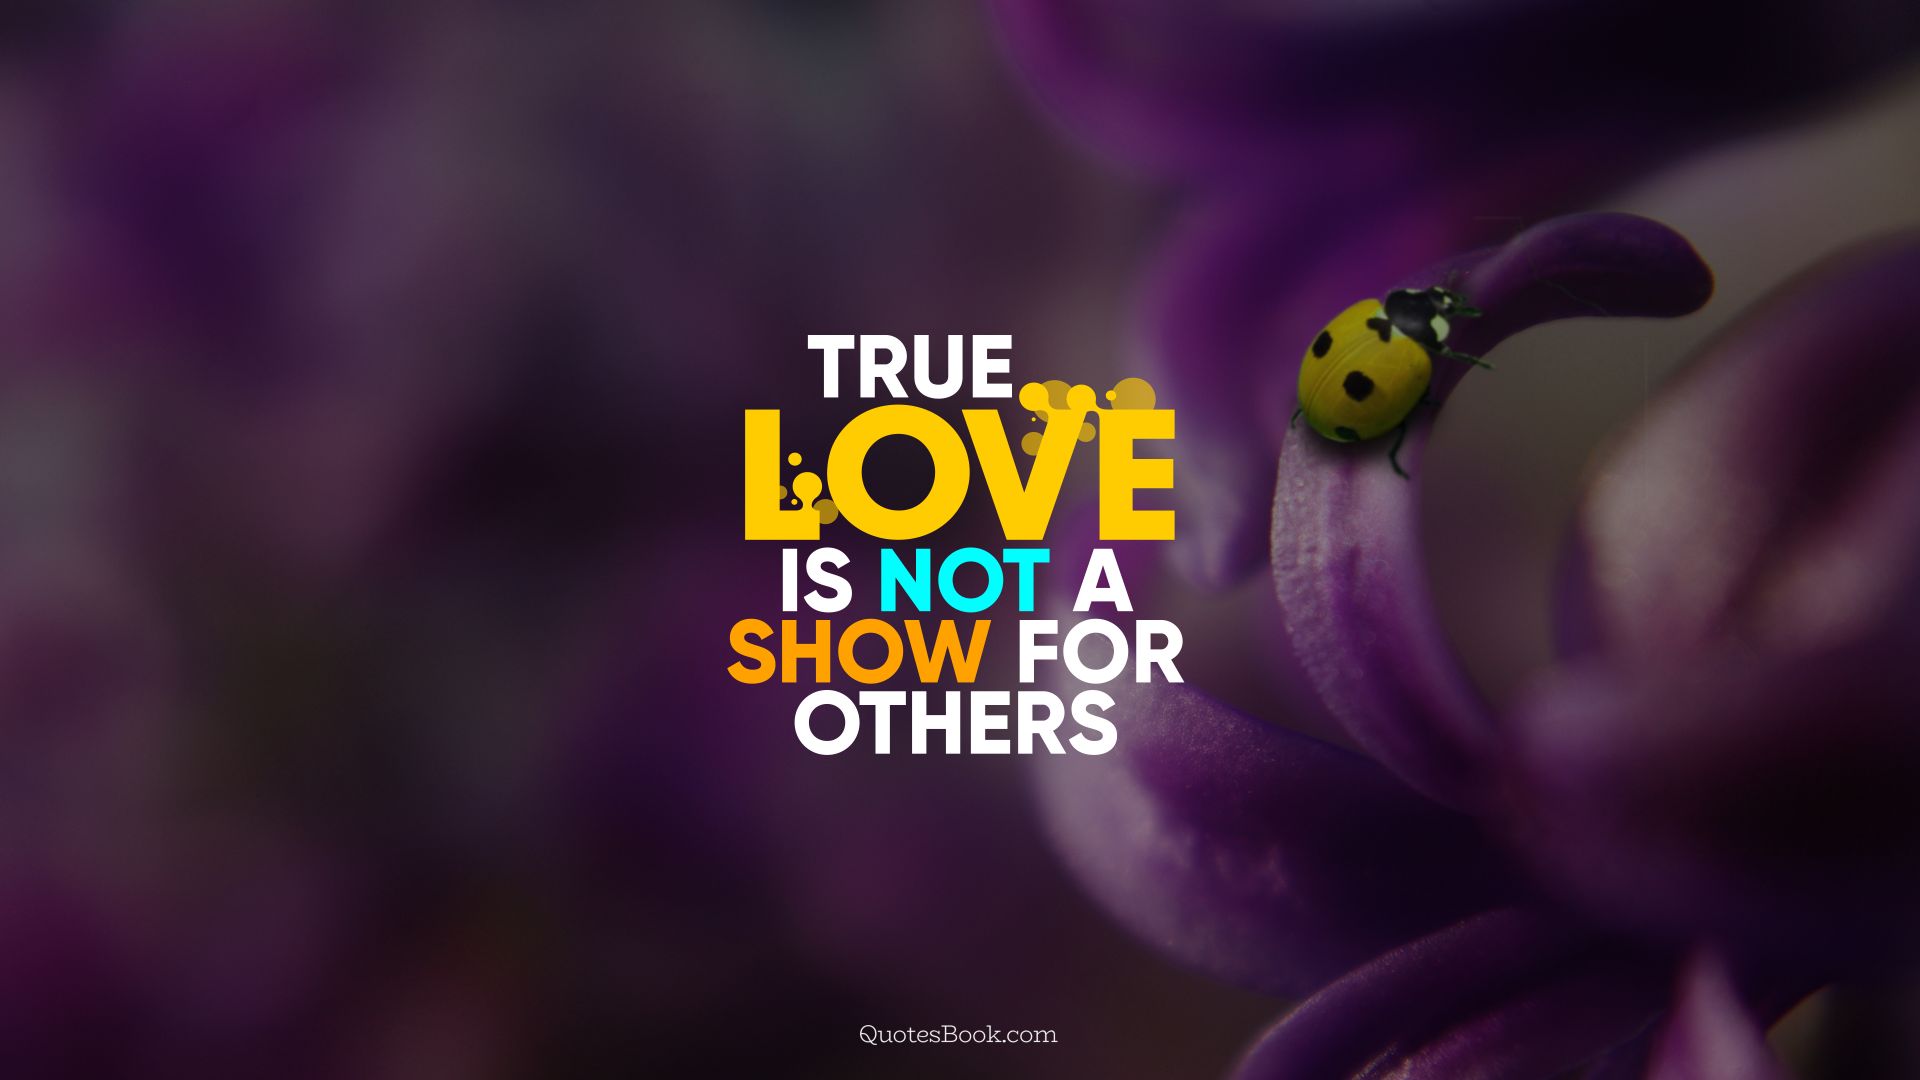 True love is not a show for others. - Quote by QuotesBook